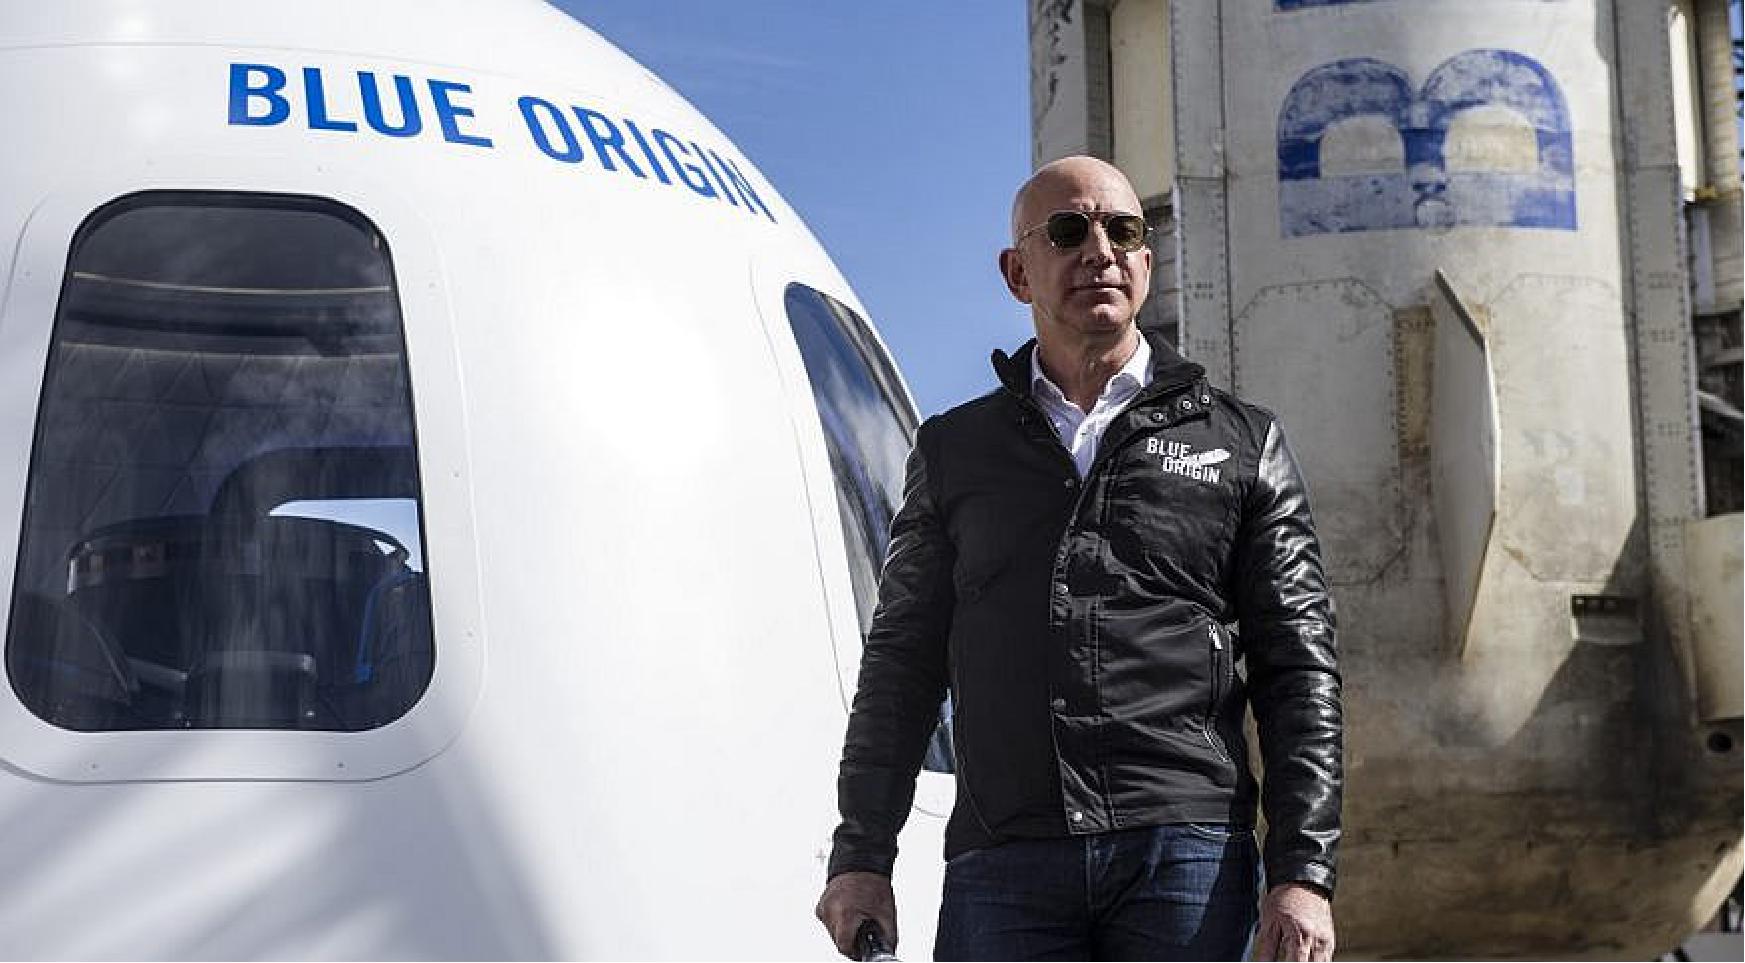 Figure 22: Jeff Bezos announced June 7 he will fly on Blue Origin’s first crewed New Shepard flight in July, accompanied by his brother (image credit: Tom Kimmell for SpaceNews)